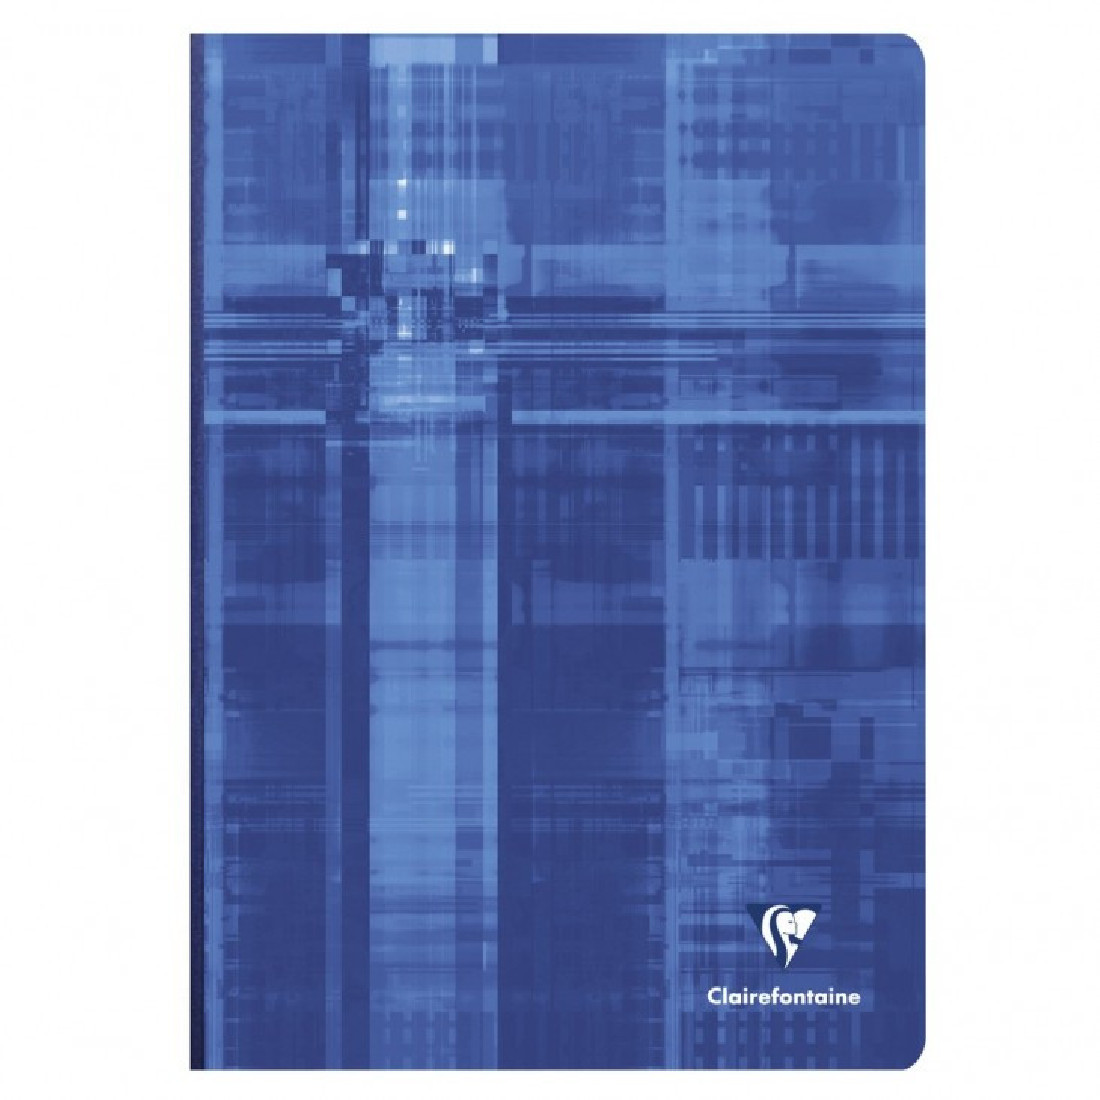 Clairefontaine notebook clothbound A4 21X29,7cm, lined without margin, 192 pages, 90g, 9146 blue